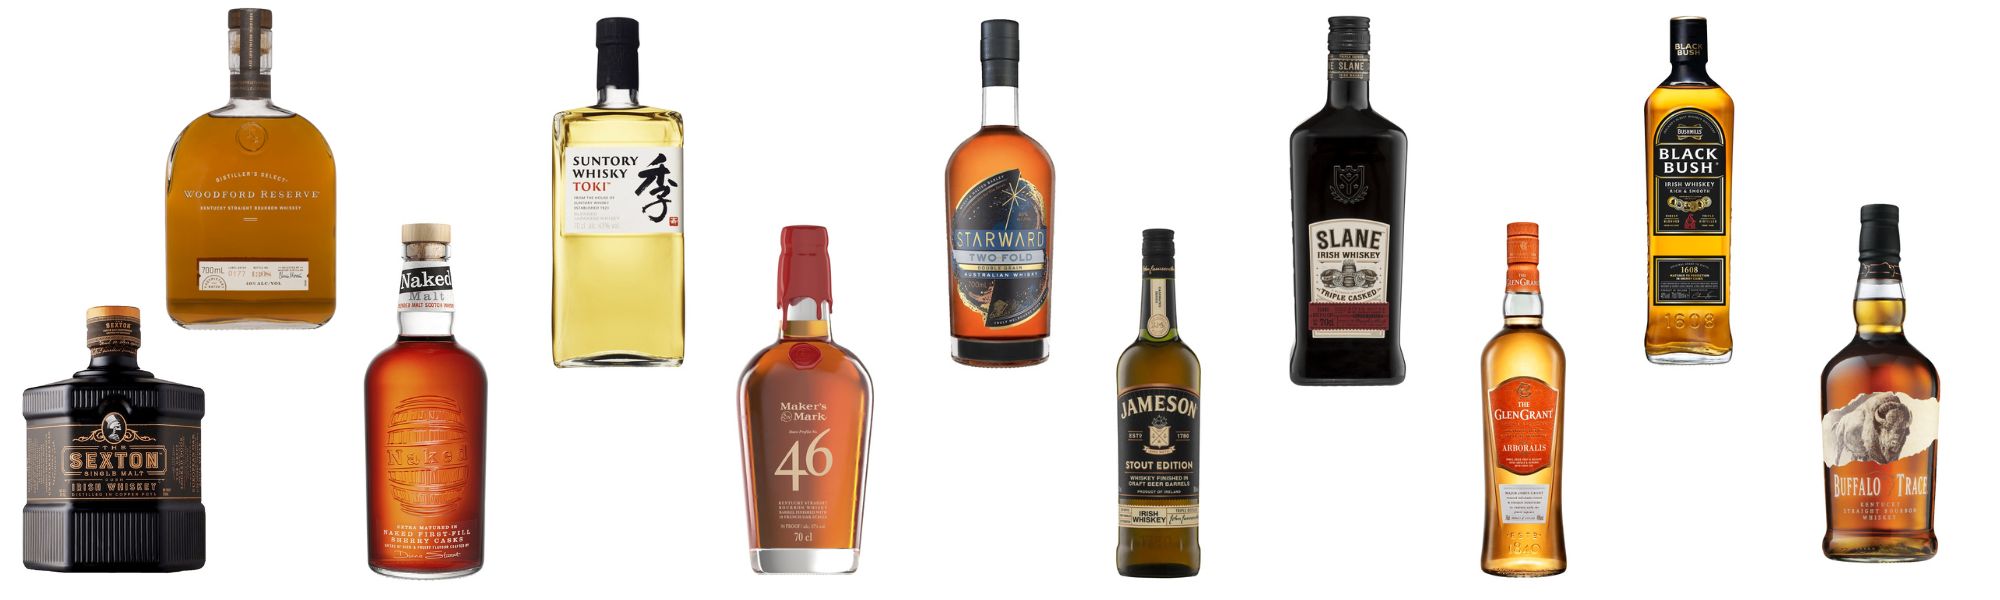 Top 10 $50 Whiskies | The Whisky List